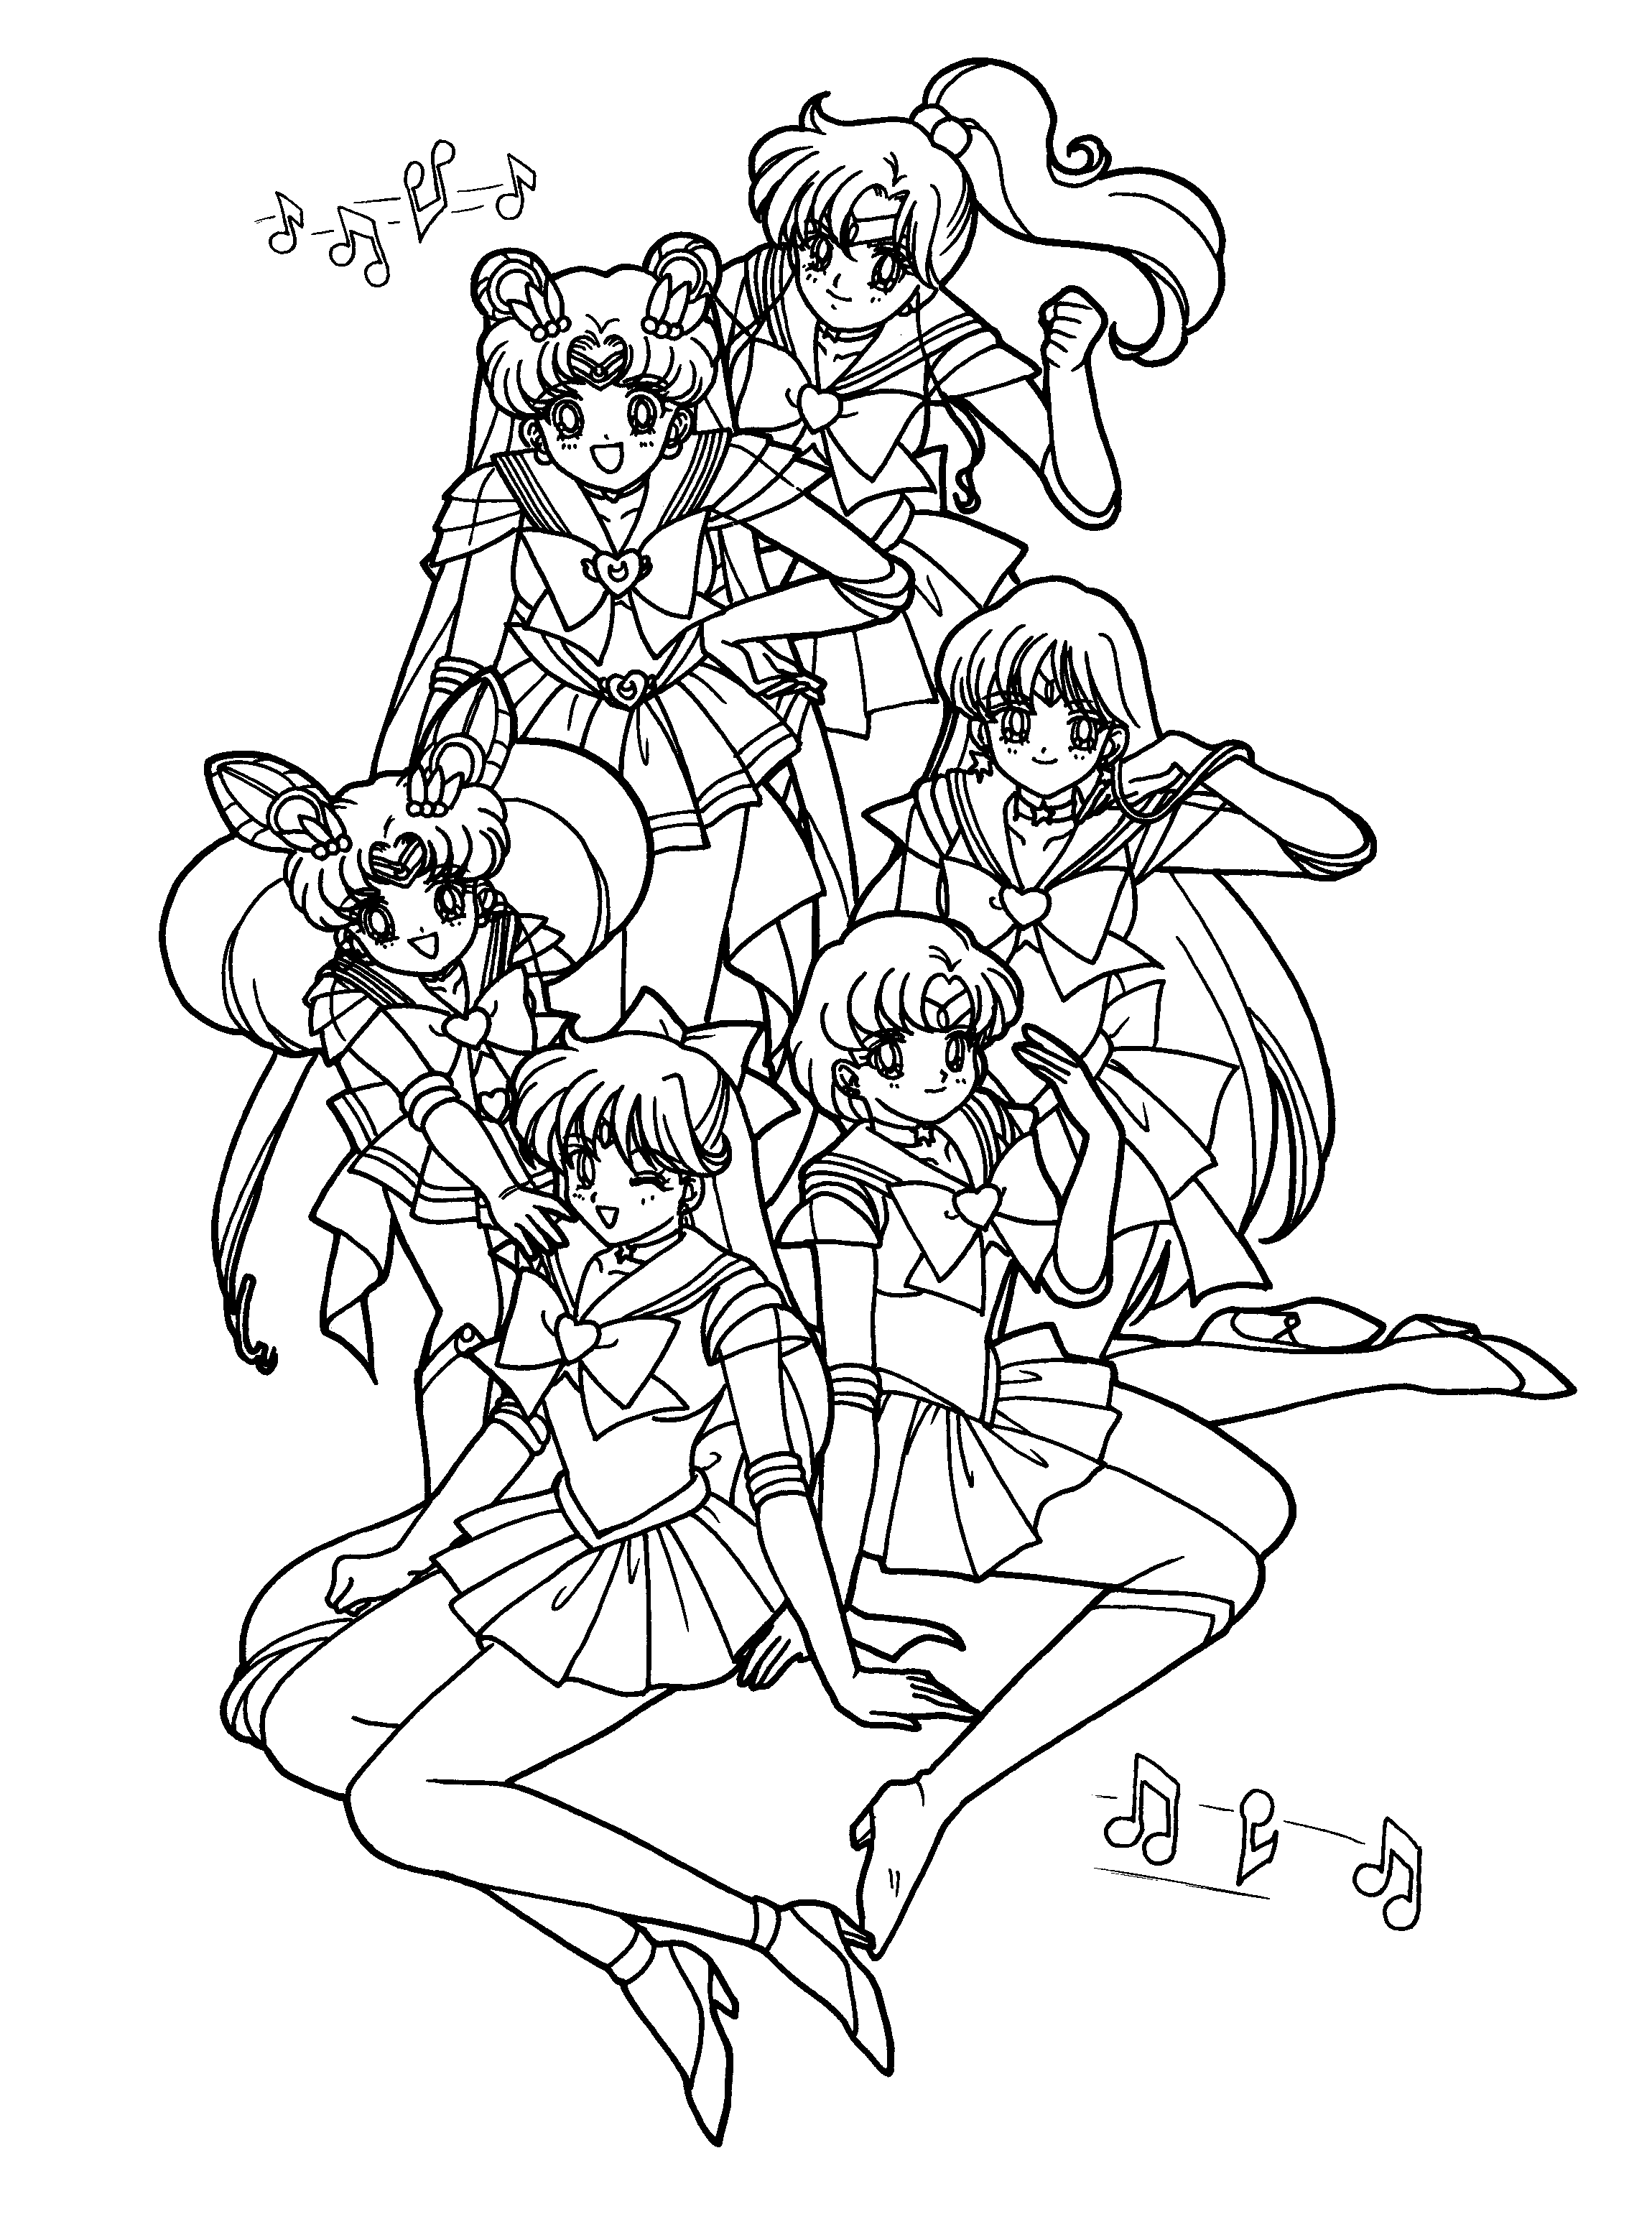 sailor moon and scout coloring pages - photo #14